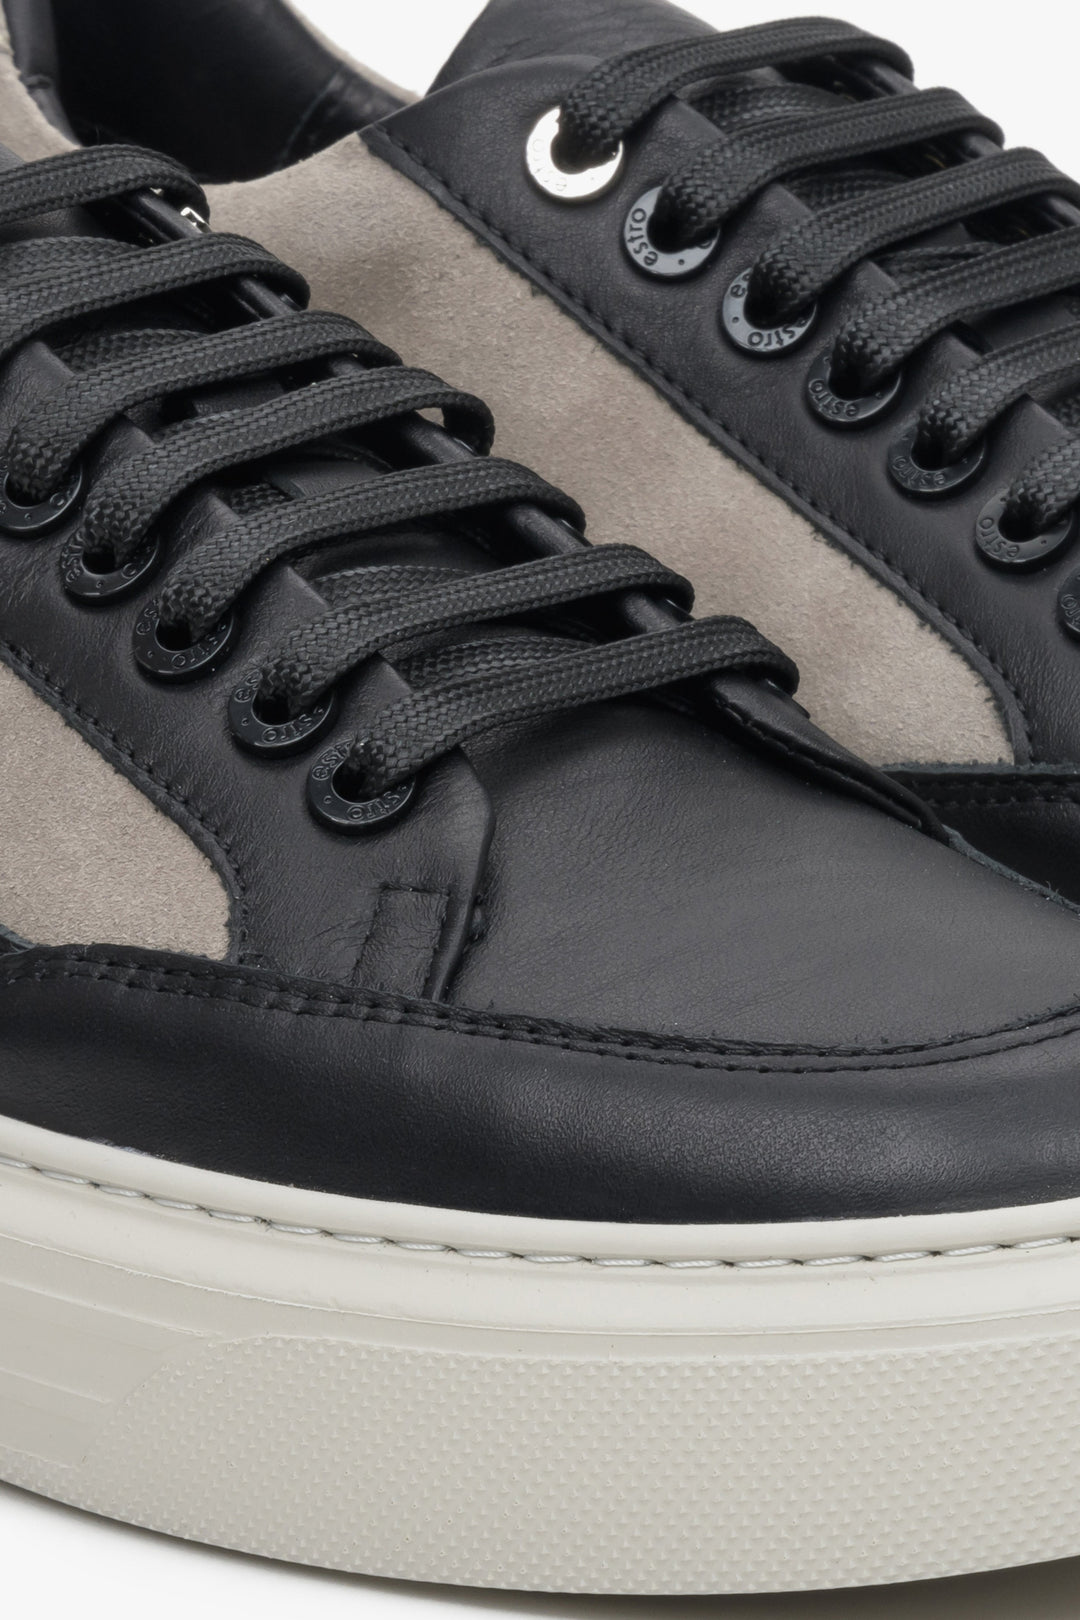 Estro men's natural velour sneakers with lacing - detail close-up.